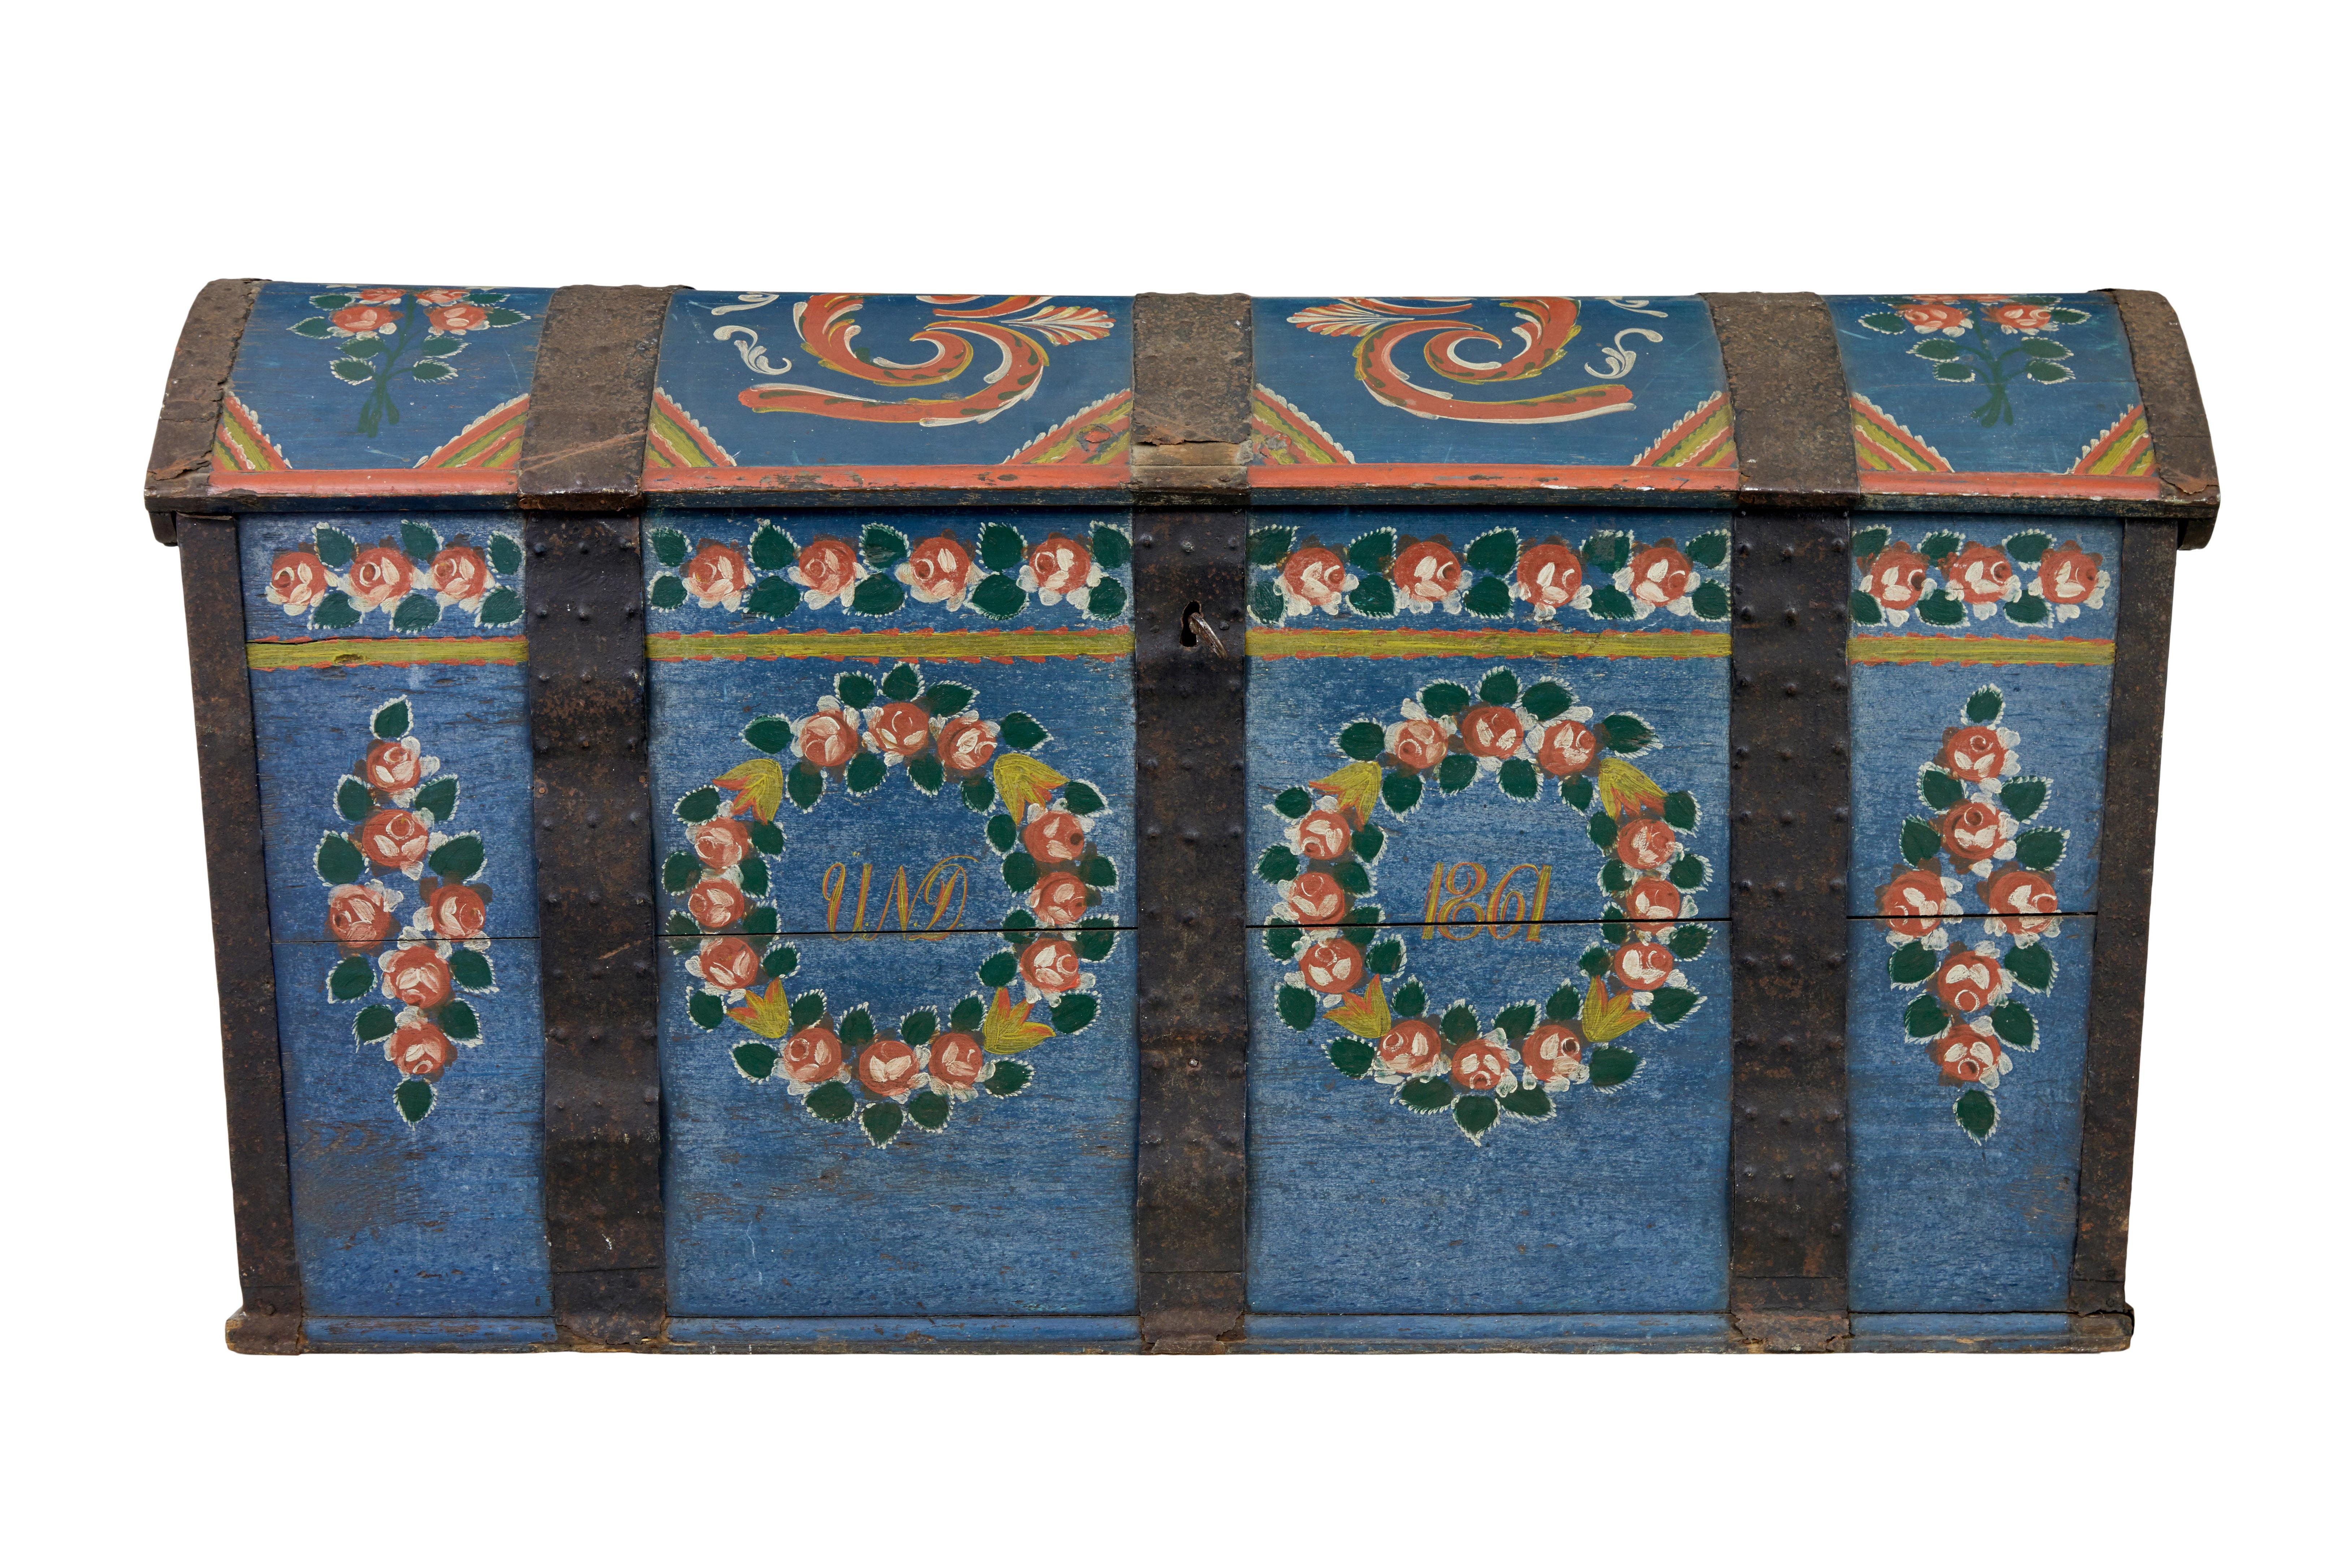 Traditional 19th century painted Swedish dome trunk circa 1861.

Hand painted and dated 1861, but chest is older as they are often given away as marriage gifts.

Made from oak rather than the usual pine.  Dome top with original metal strap work